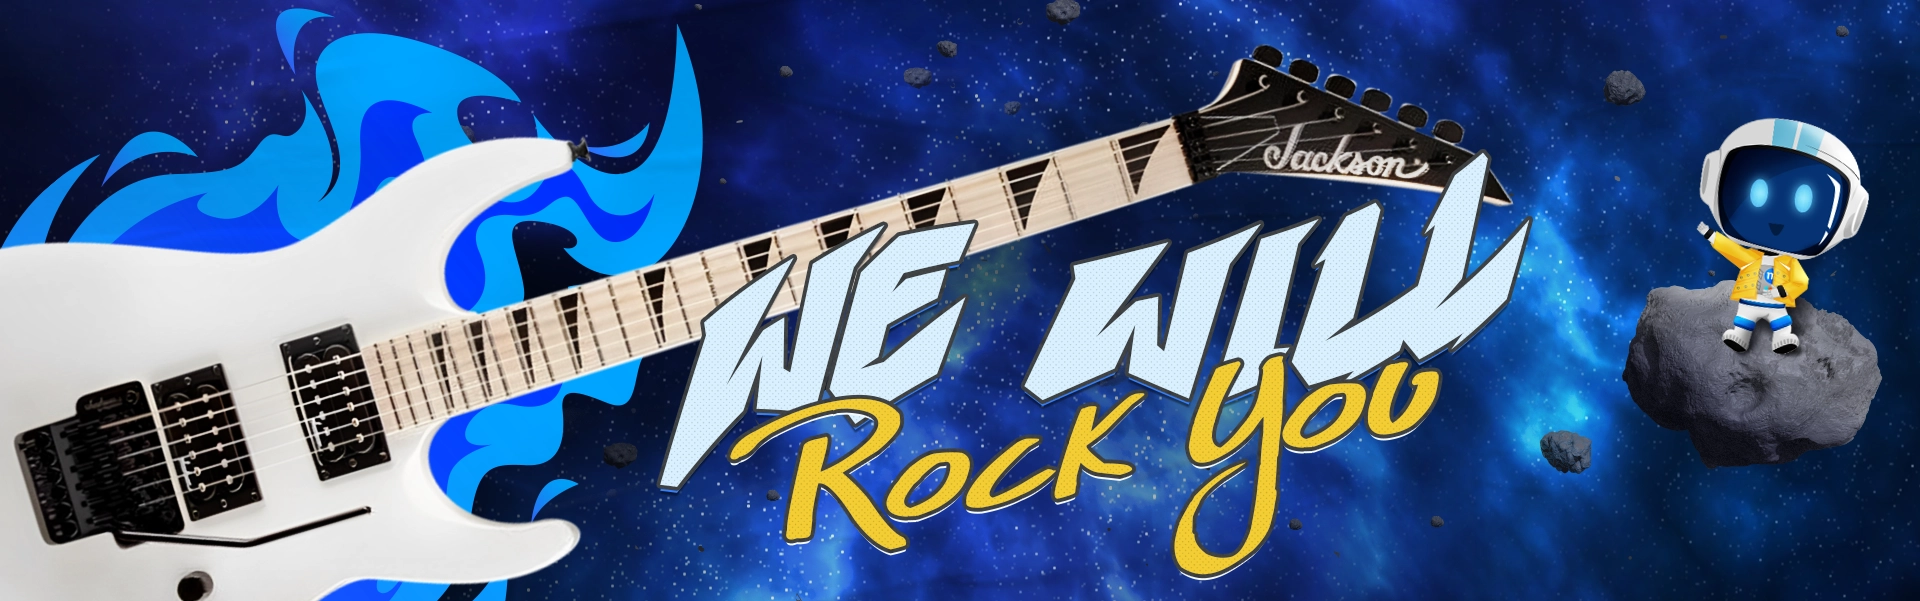 3-We-Will-Rock-You-kv-1920x600